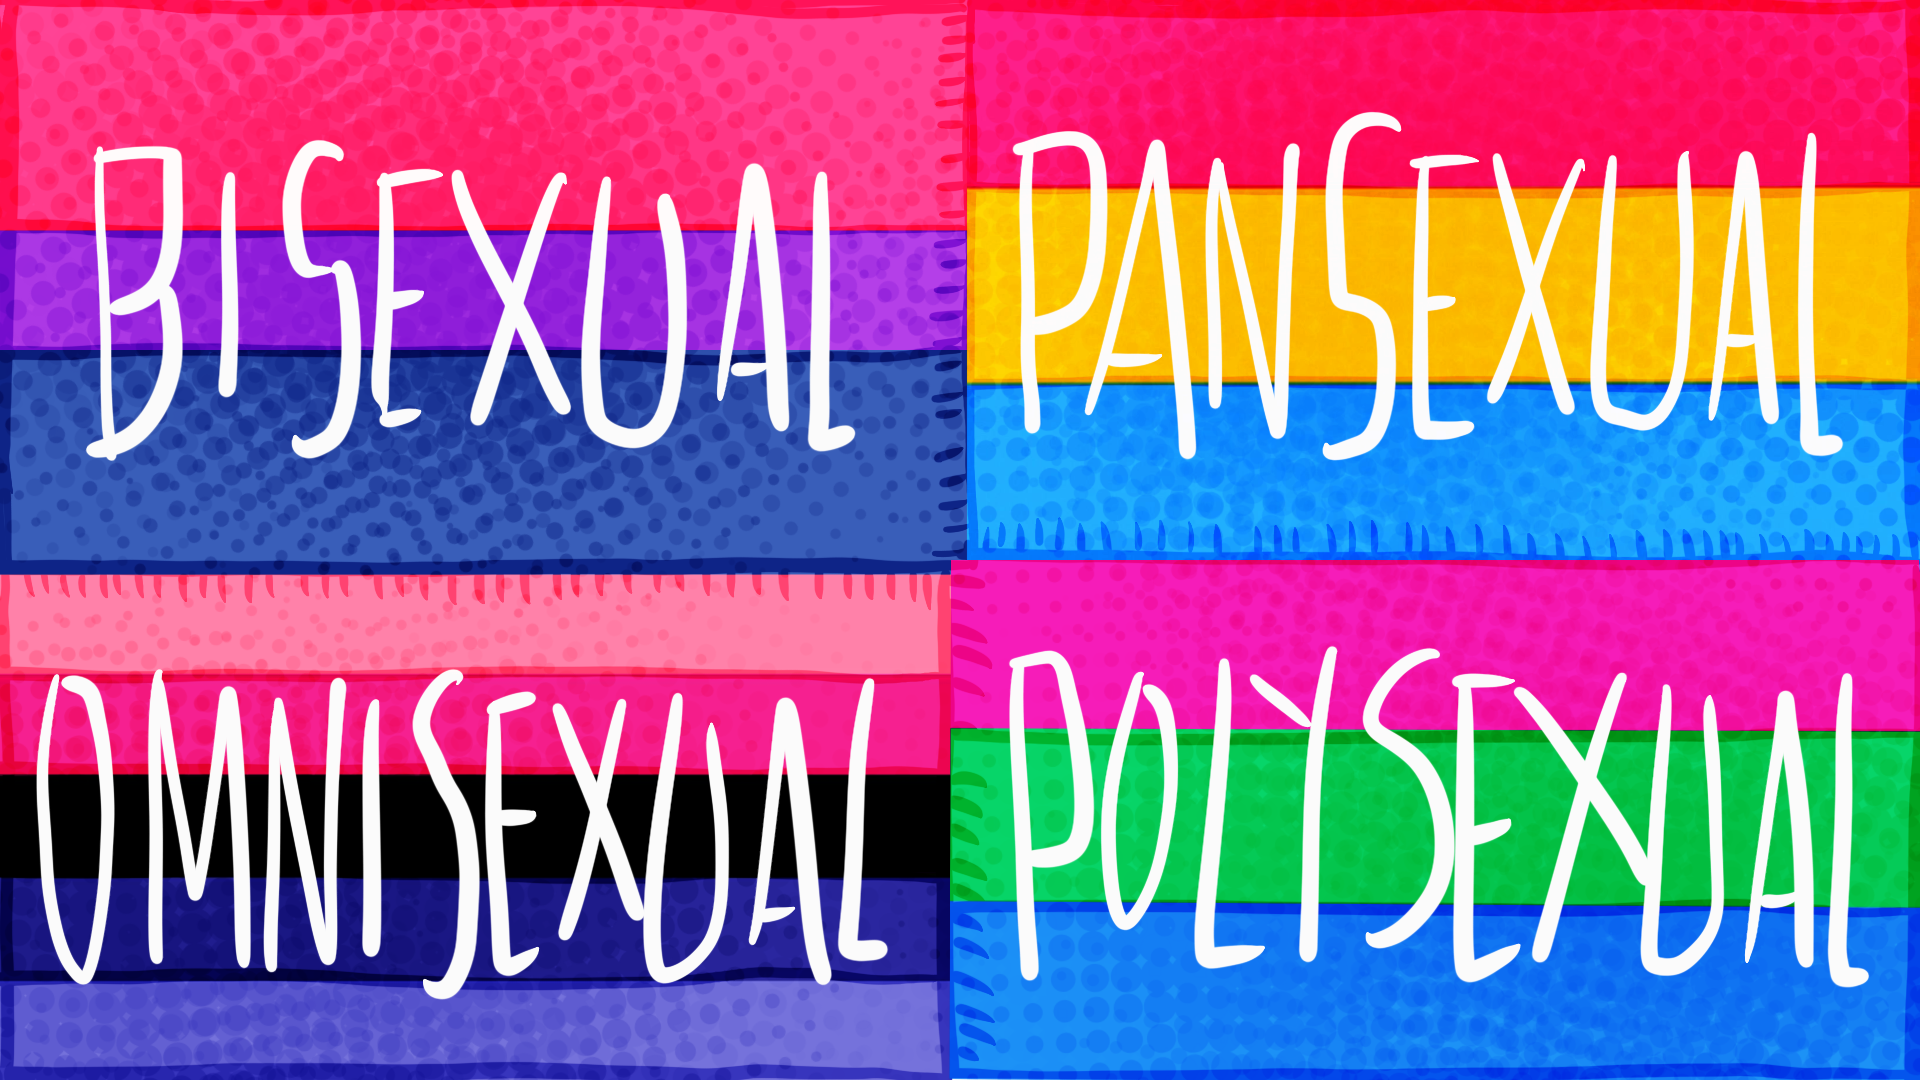 Bisexual vs. pansexual: what's the difference?